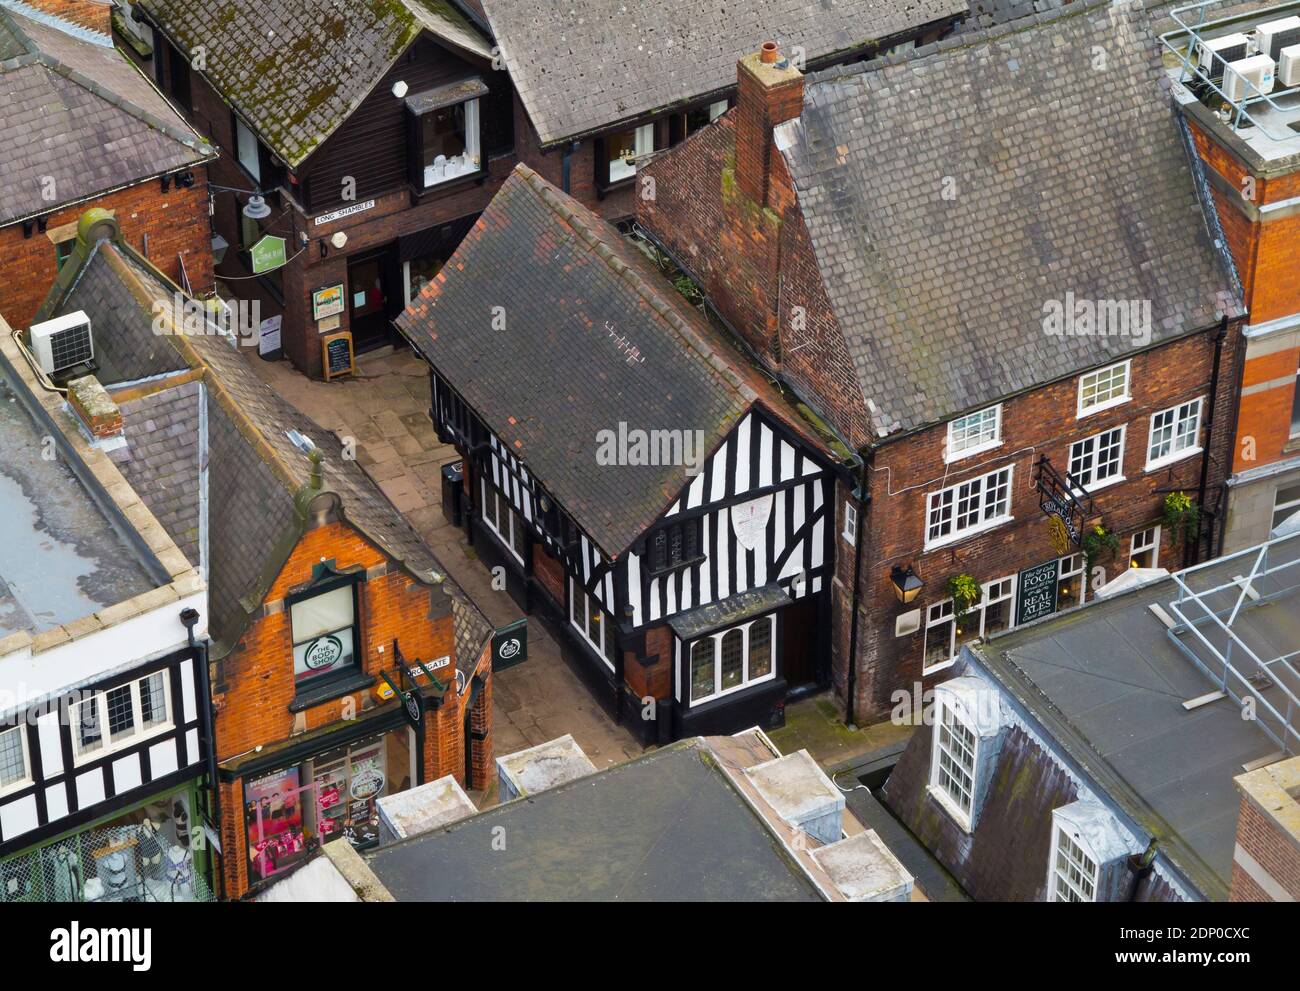 View looking down on old buildings in The Shambles area of medieval streets in Chesterfield town centre Derbyshire England UK Stock Photo